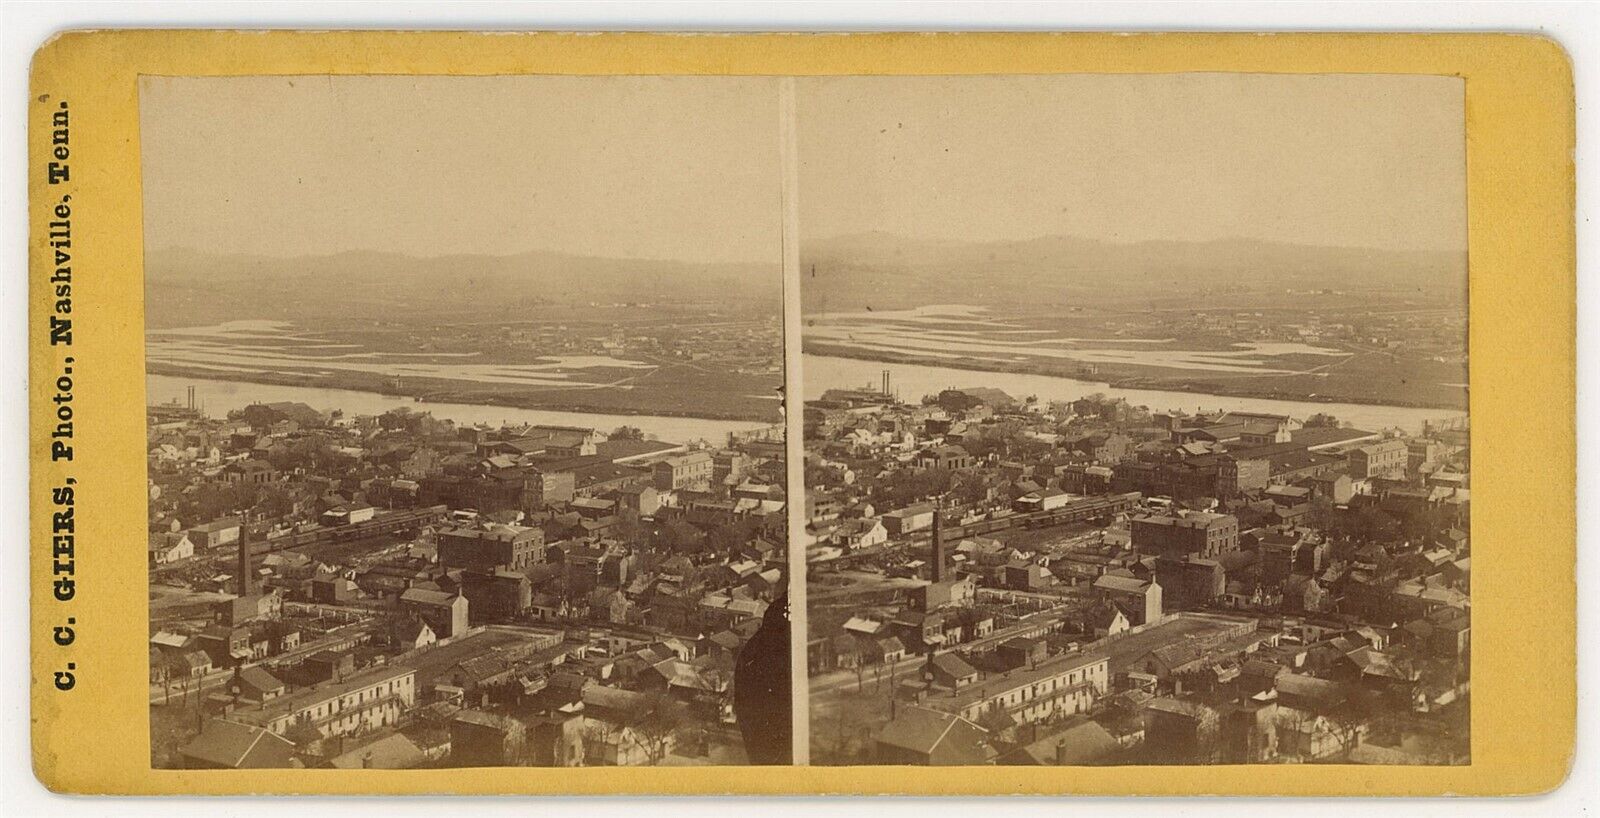 TENNESSEE SV - Nashville Panorama (Northeast) - CC Giers 1870s